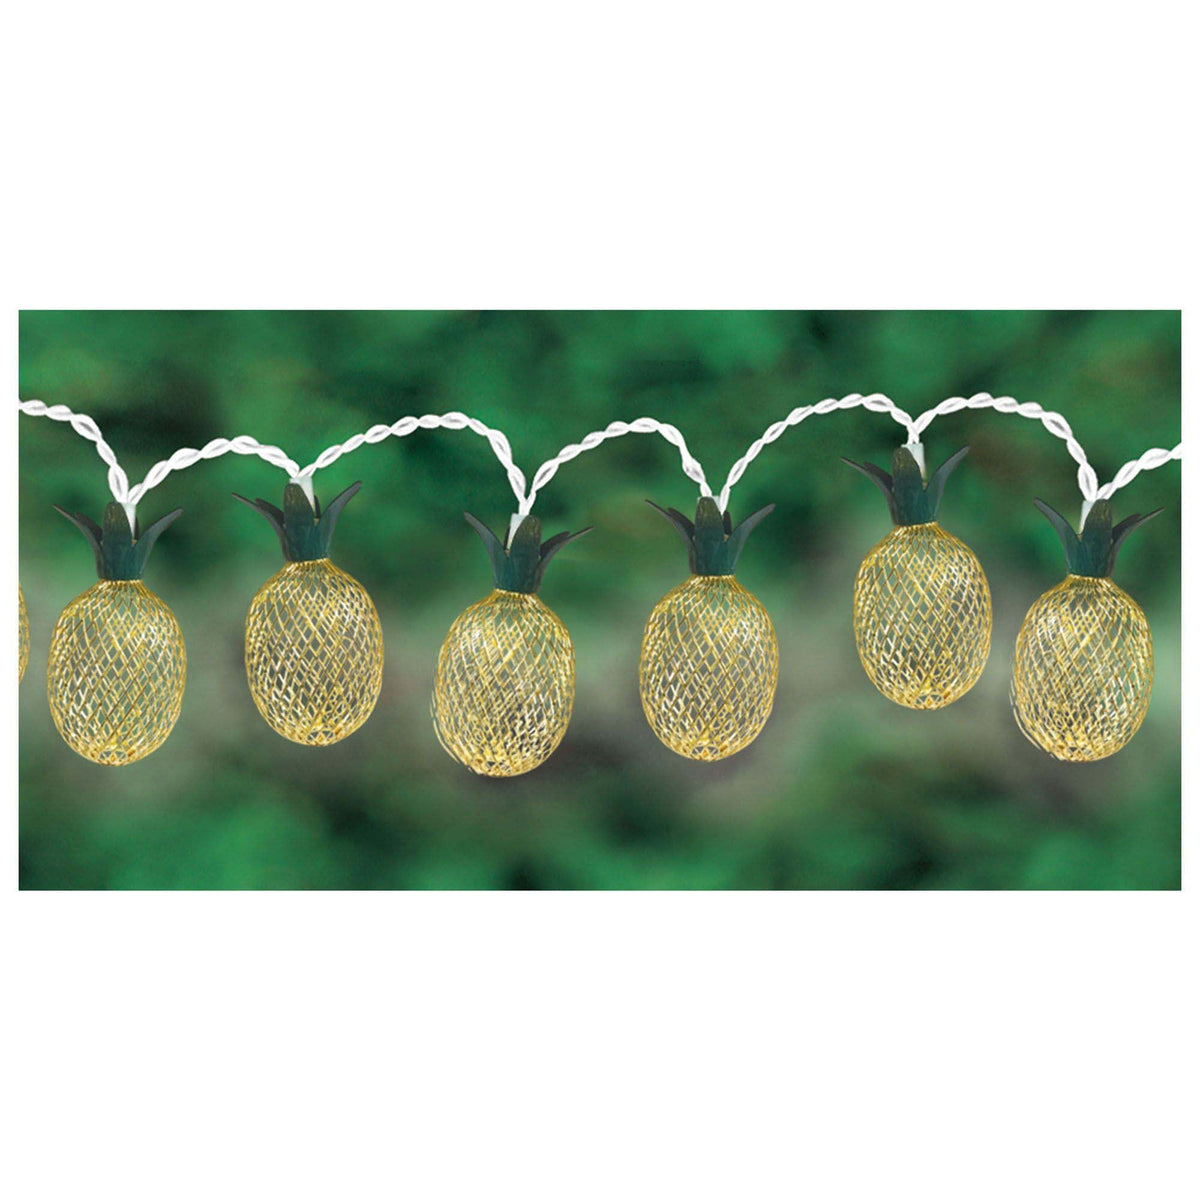 AMSCAN CA Theme Party Pineapple LED String Light, 5 x 4 Inches, 1 Count